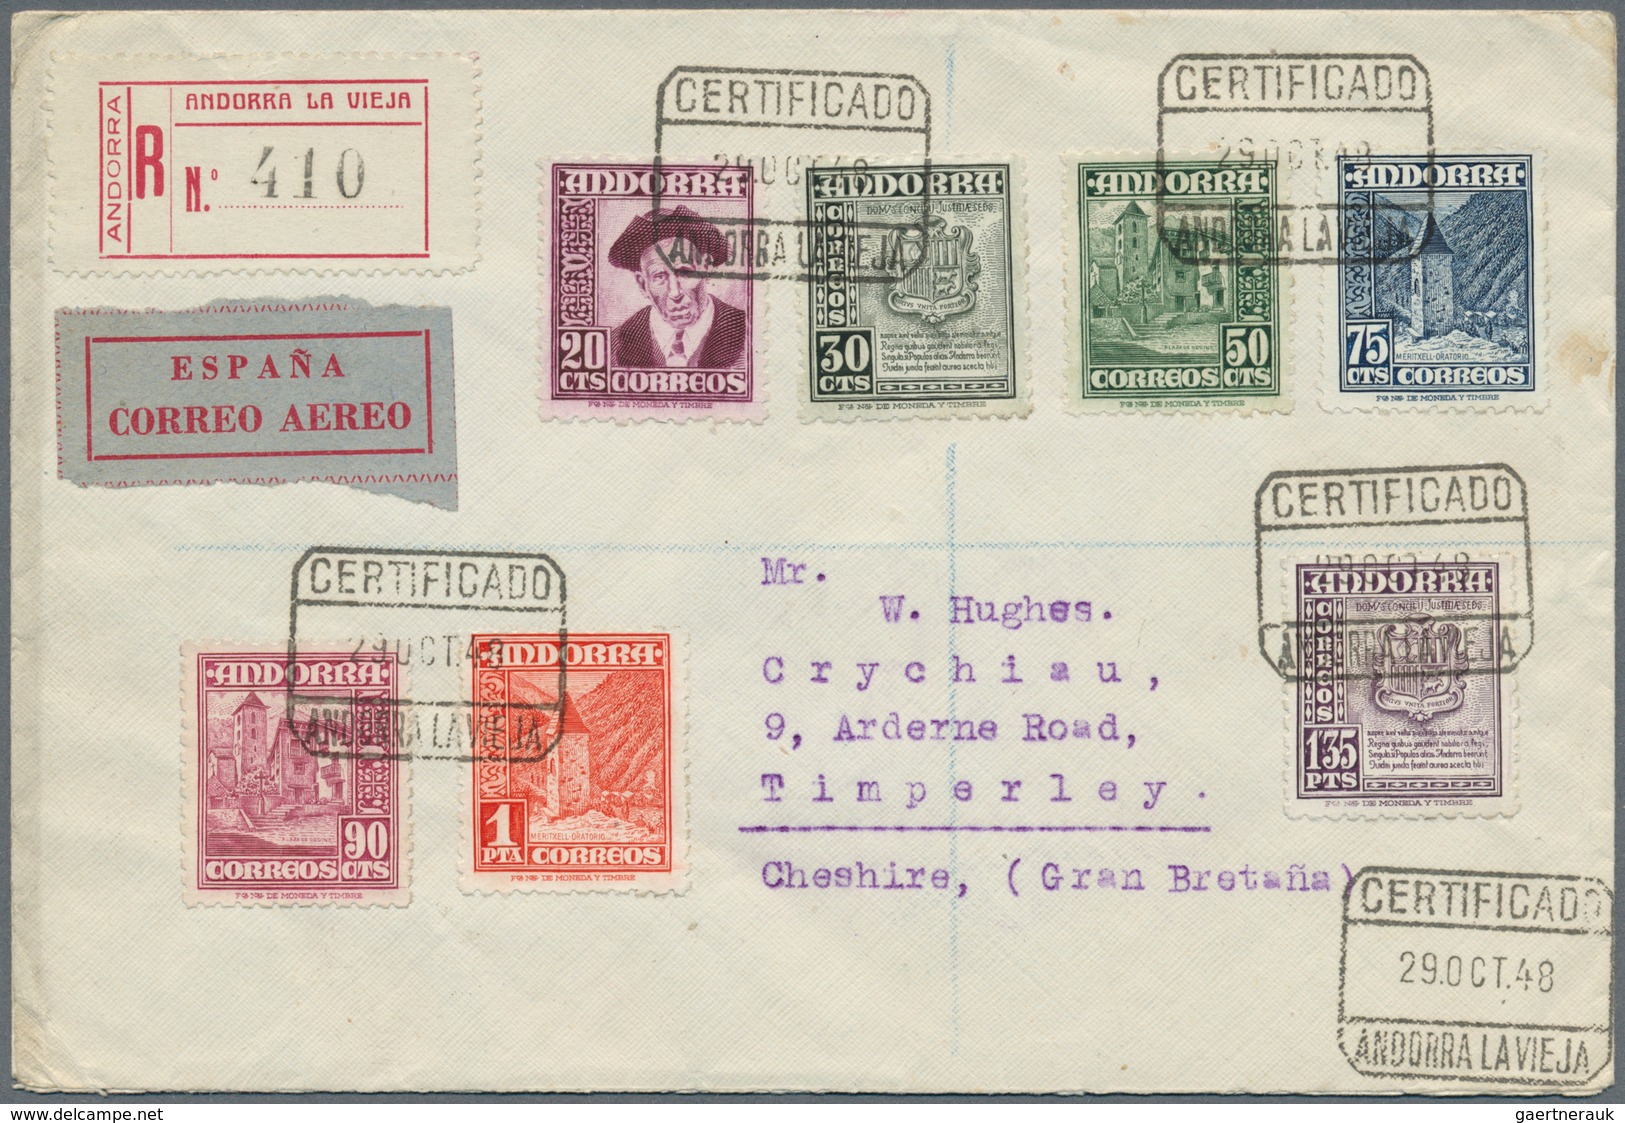 Andorra - Französische Post: 1932-70, Collection of 25 covers, postcards and FDC from French and Spa